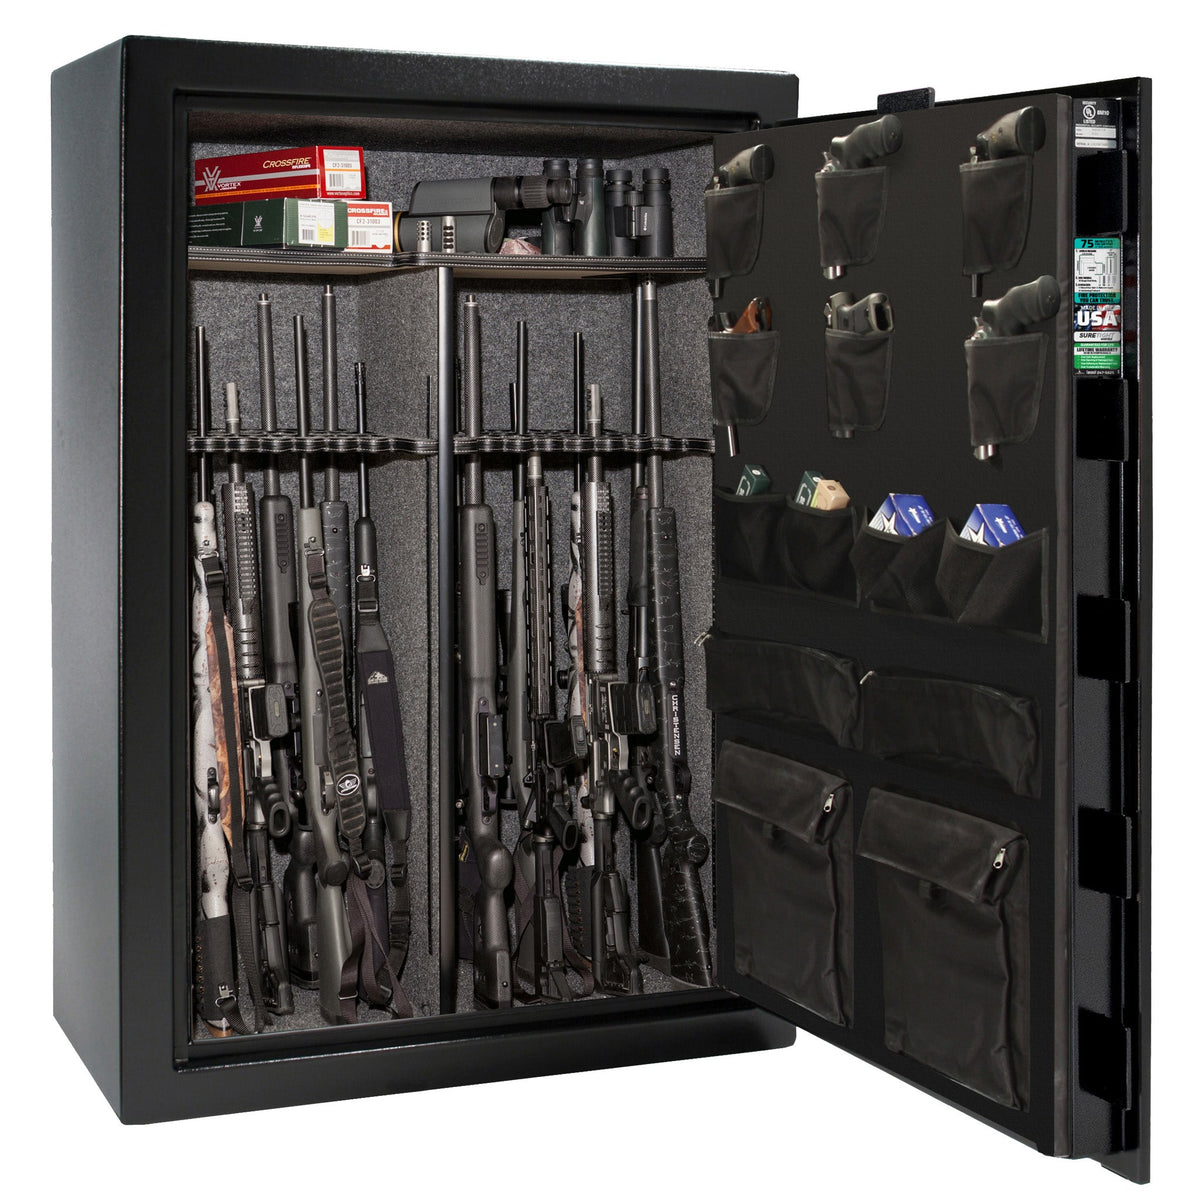 Fatboy Jr. Series | 48XL Edition | Level 4 Security | 75 Minute Fire Protection | Dimensions: 60.5&quot;(H) x 42&quot;(W) x 27.5&quot;(D) | Up to 64 Long Guns | Black Textured | Electronic Lock